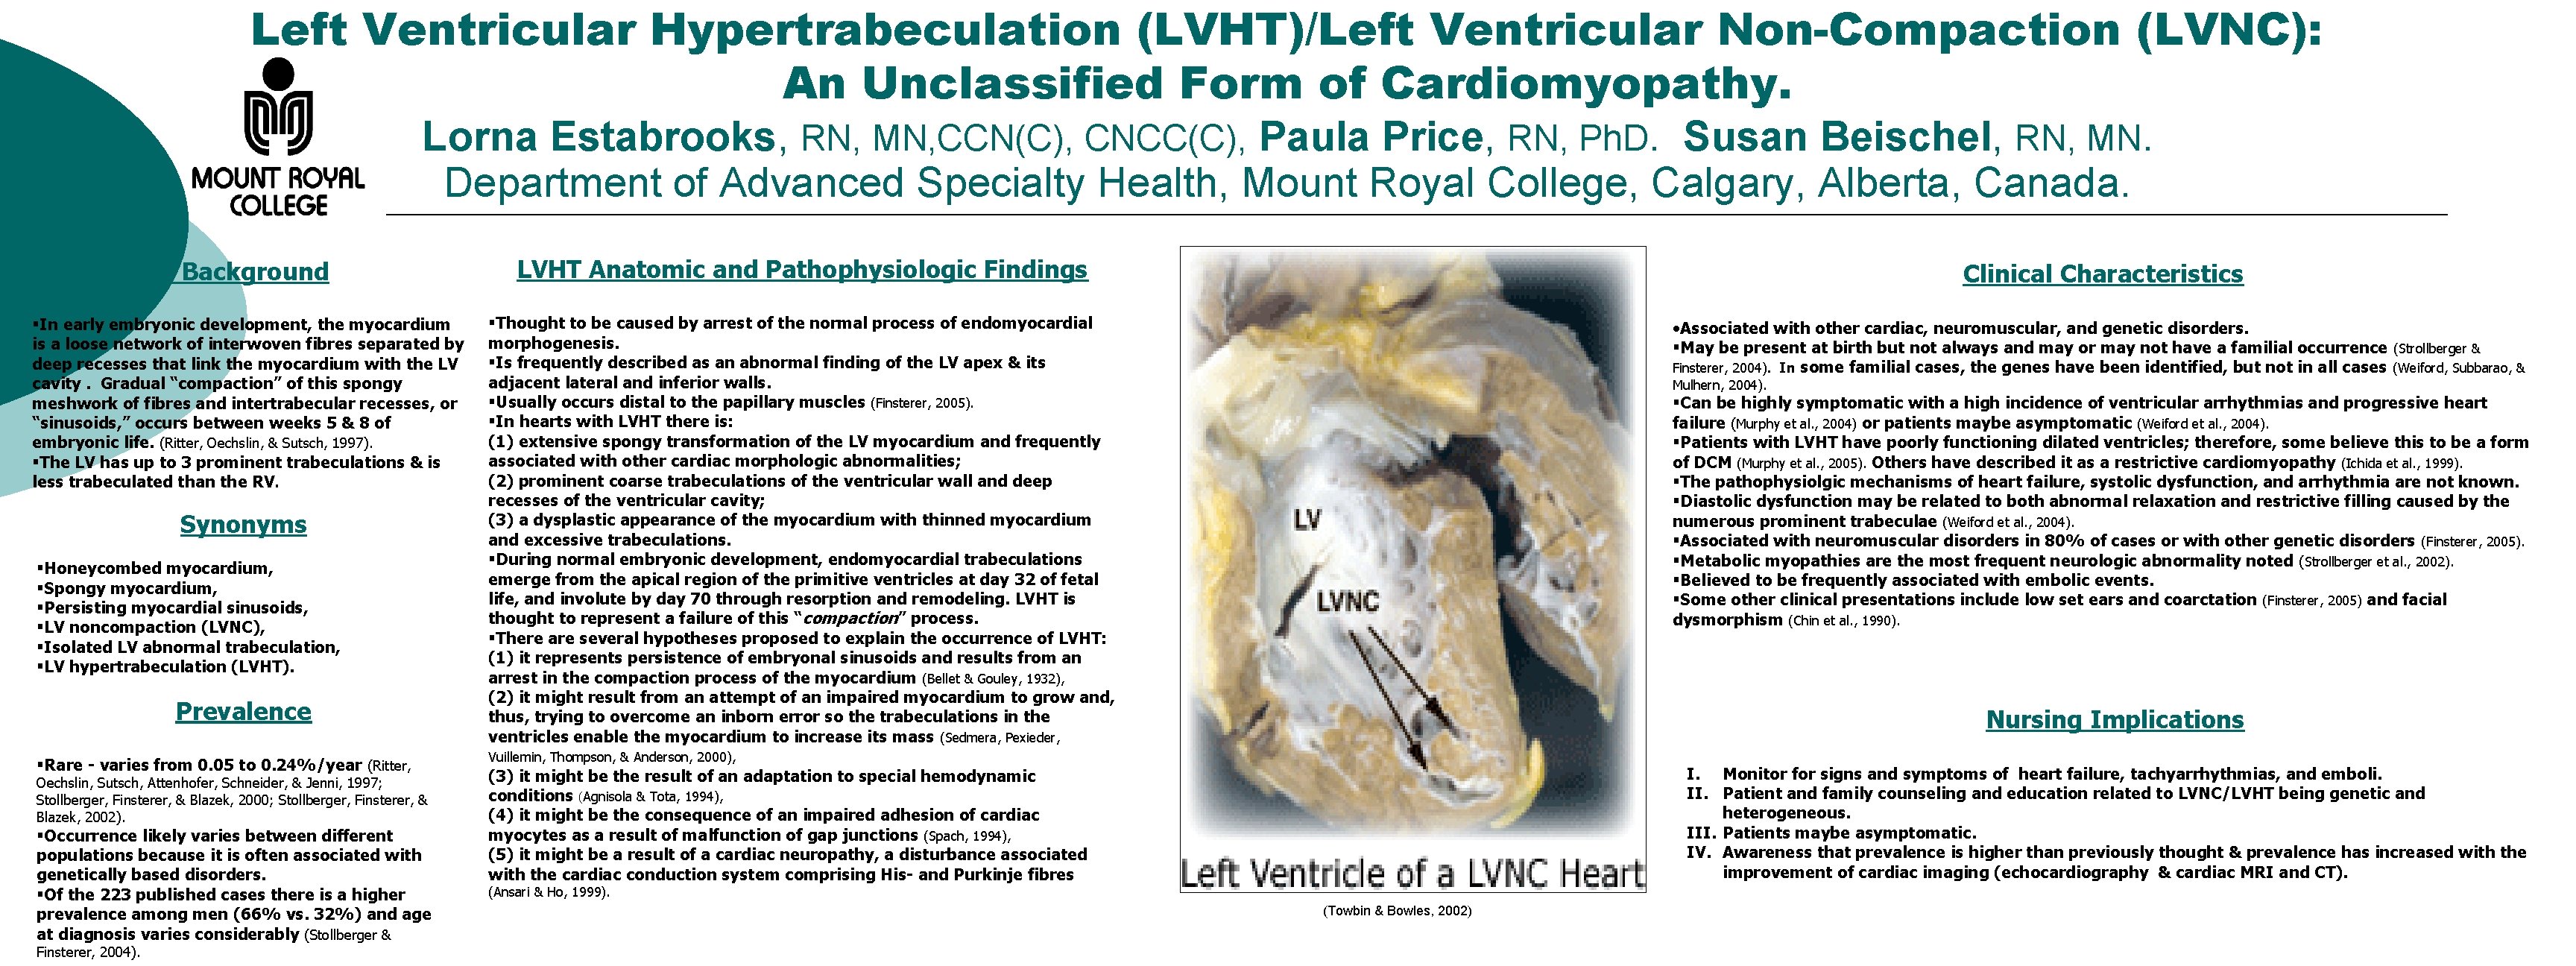 Left Ventricular Hypertrabeculation (LVHT)/Left Ventricular Non-Compaction (LVNC): An Unclassified Form of Cardiomyopathy. Lorna Estabrooks,